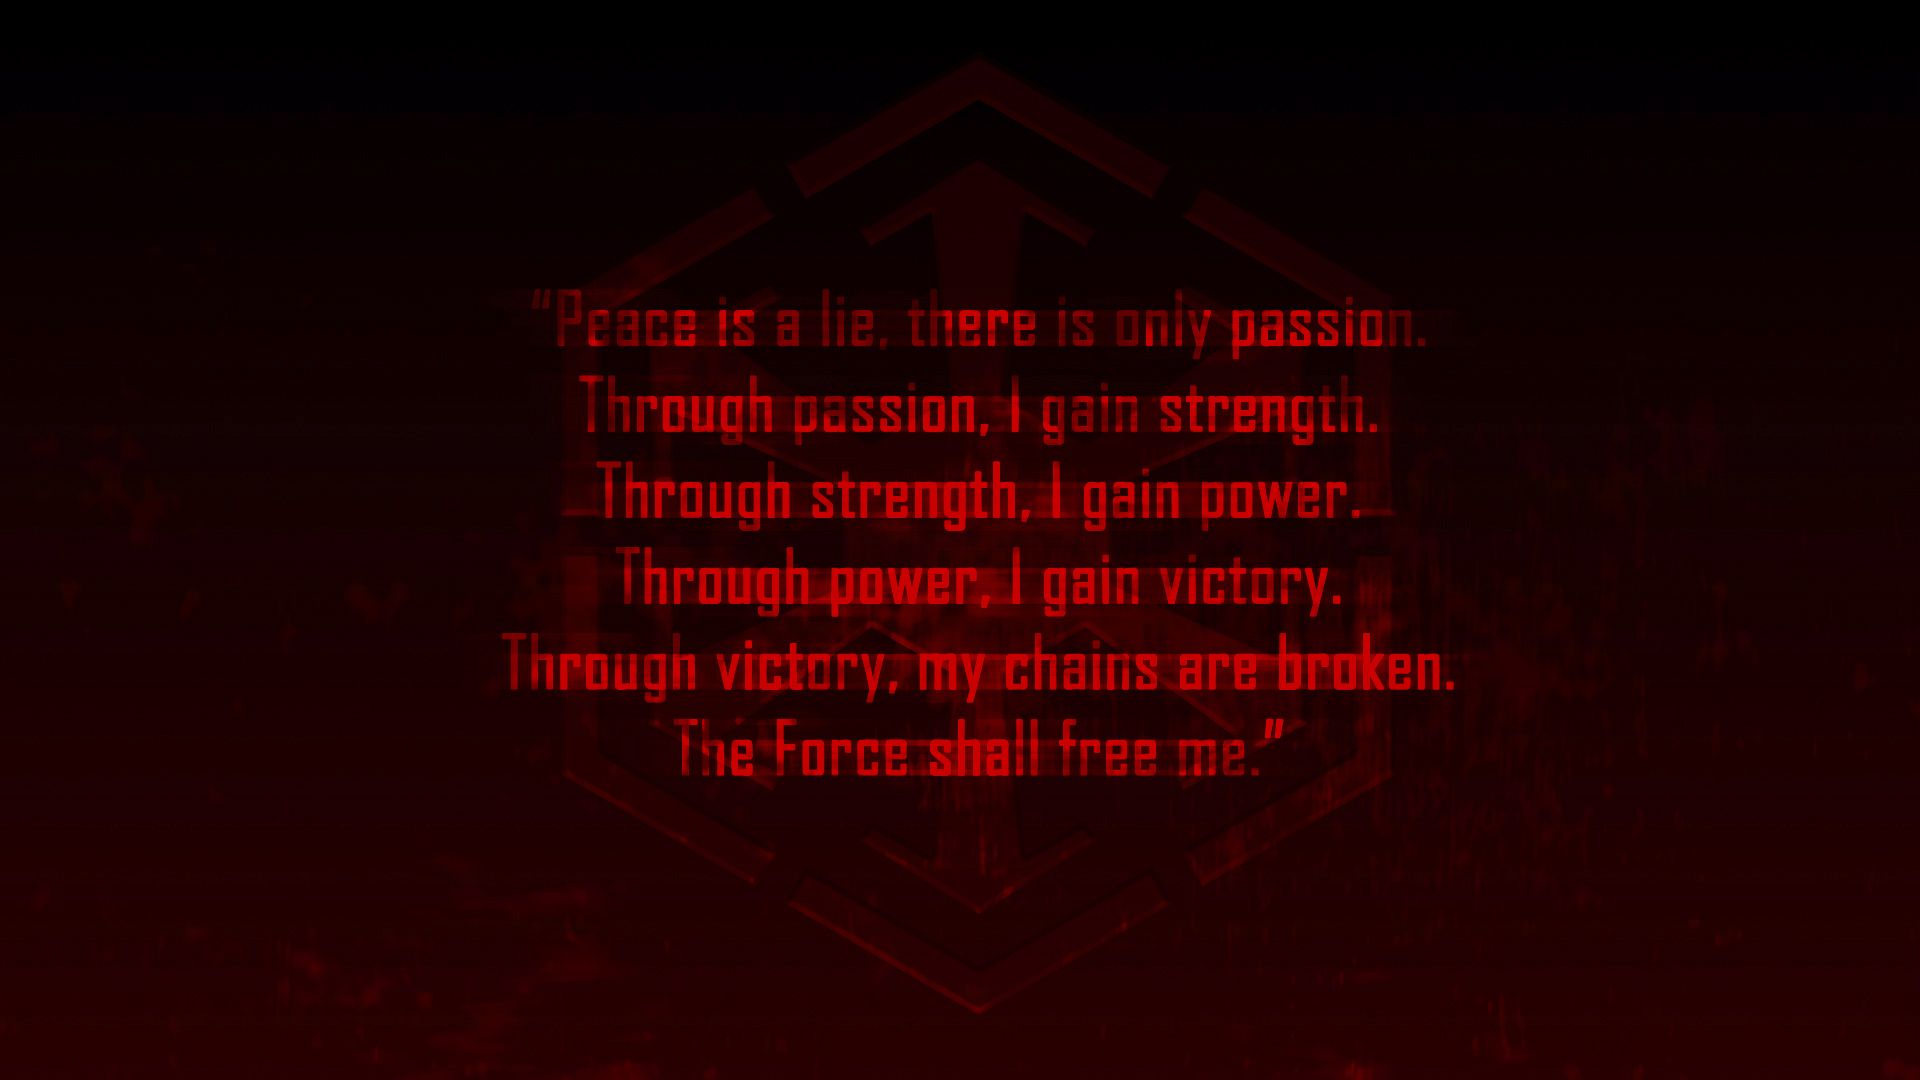 Star Wars Sith Code Wallpapers.